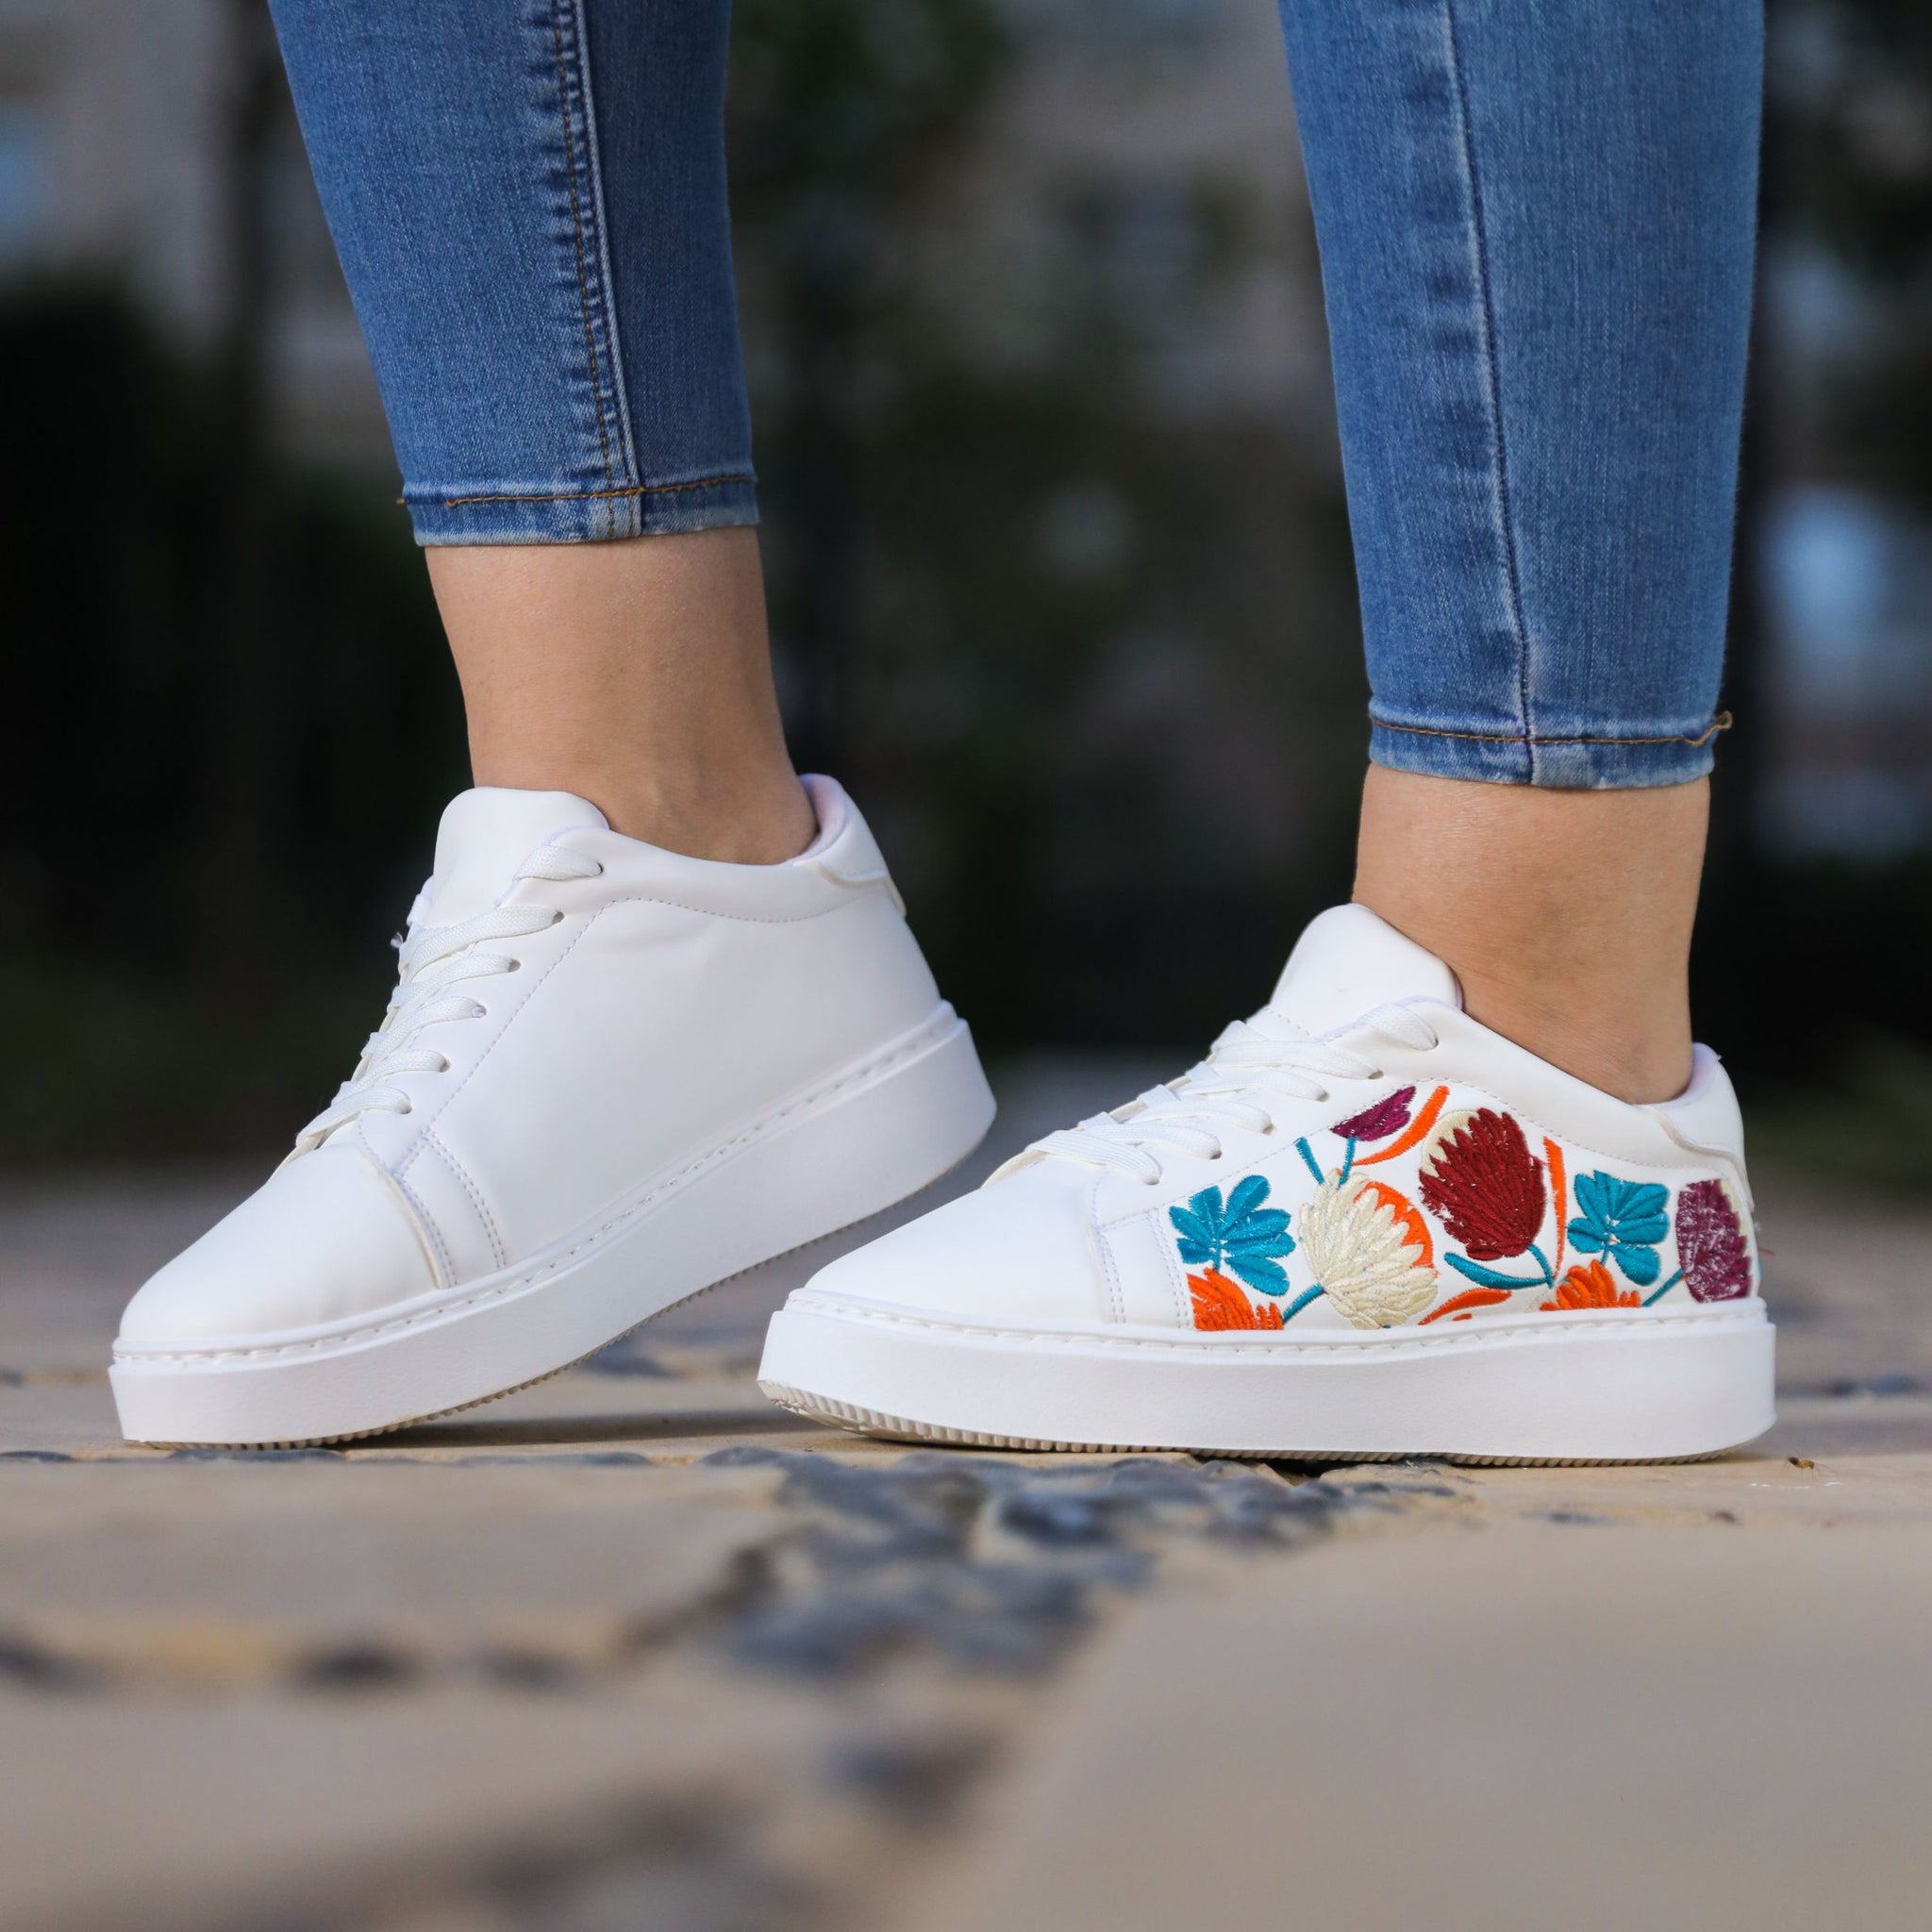 White Flower Petal Lace Up Embroidered Sneakers